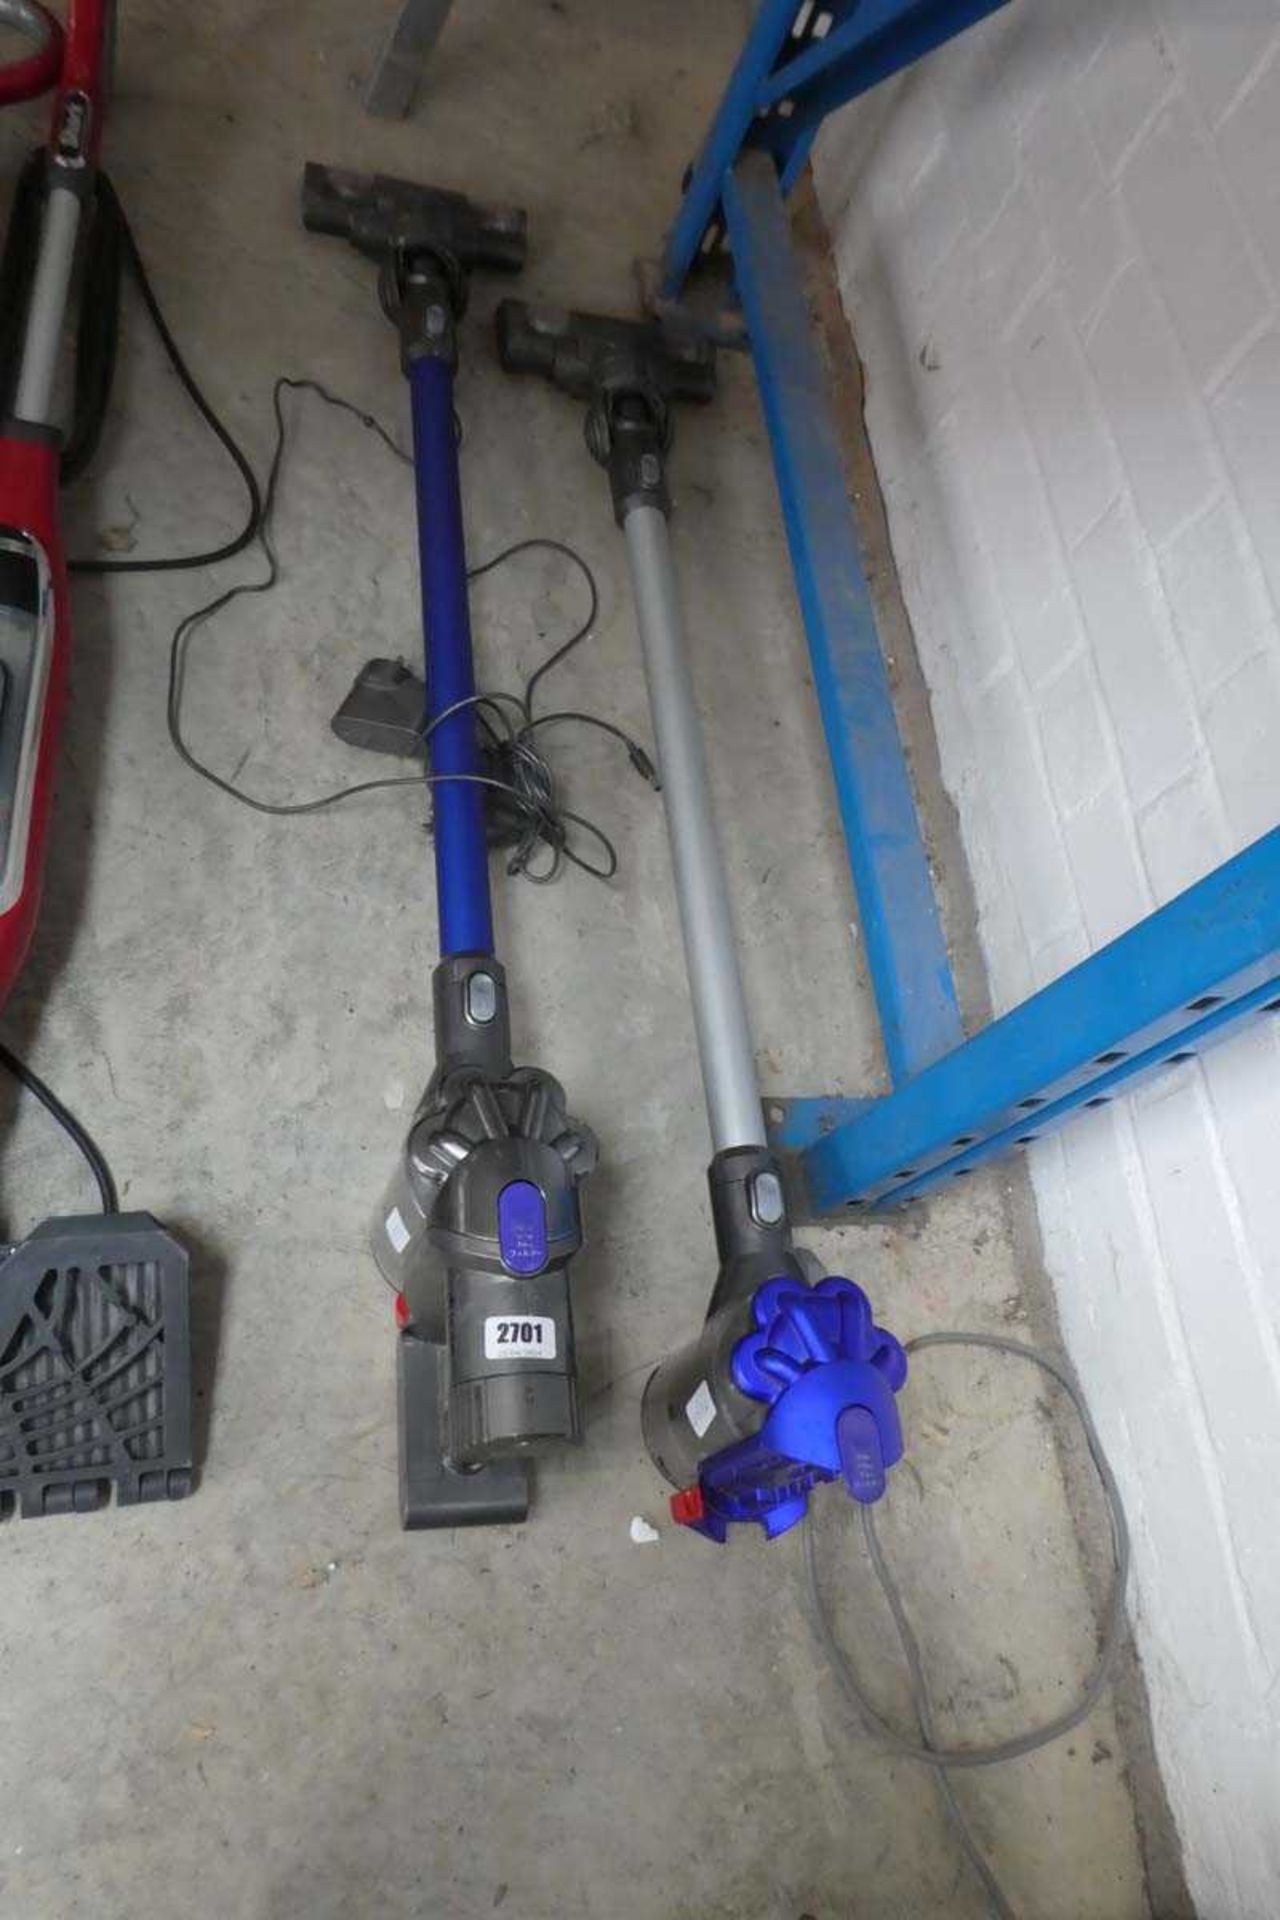 Dyson hand held vacuum cleaner, together with a part Dyson vacuum cleaner, with 2 chargers